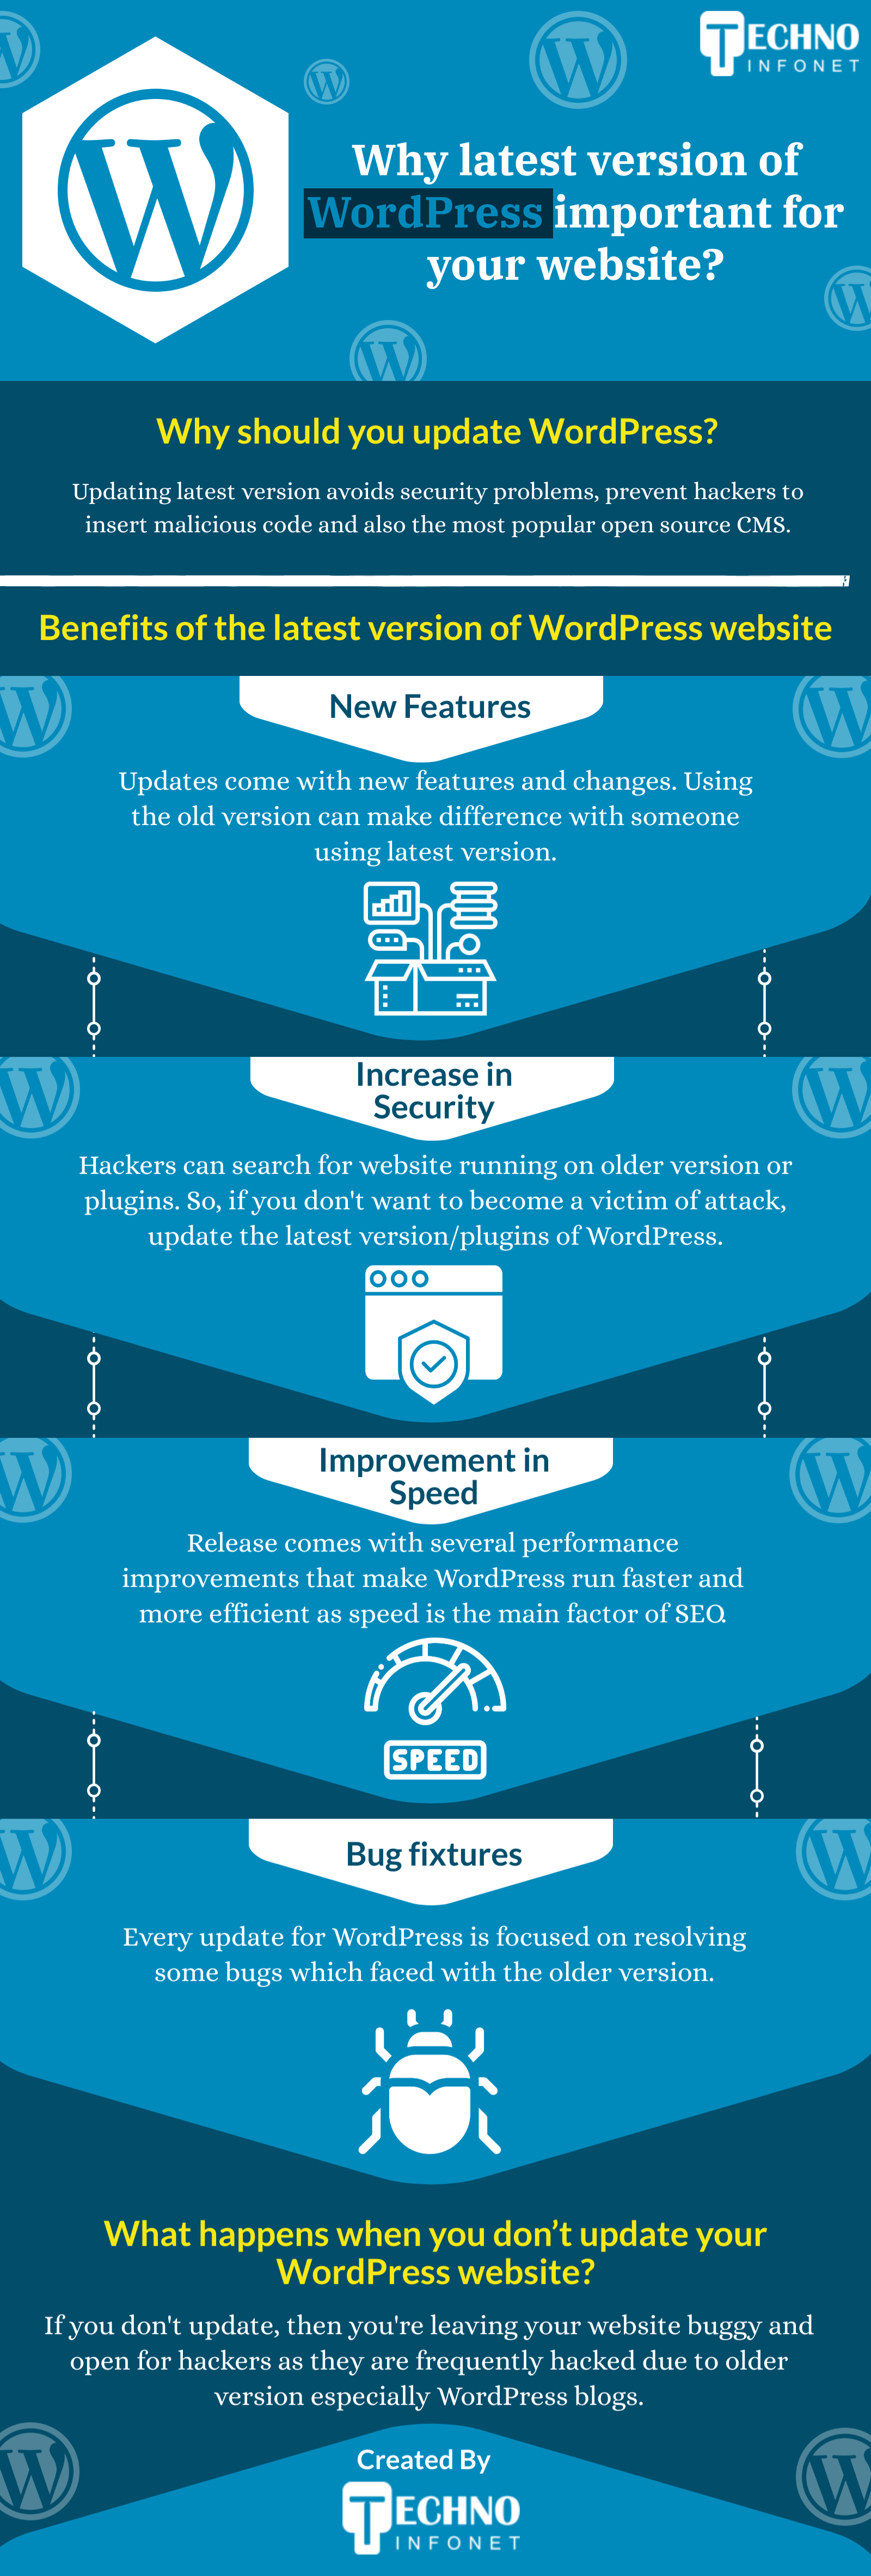 Why latest version of WordPress important for your website?